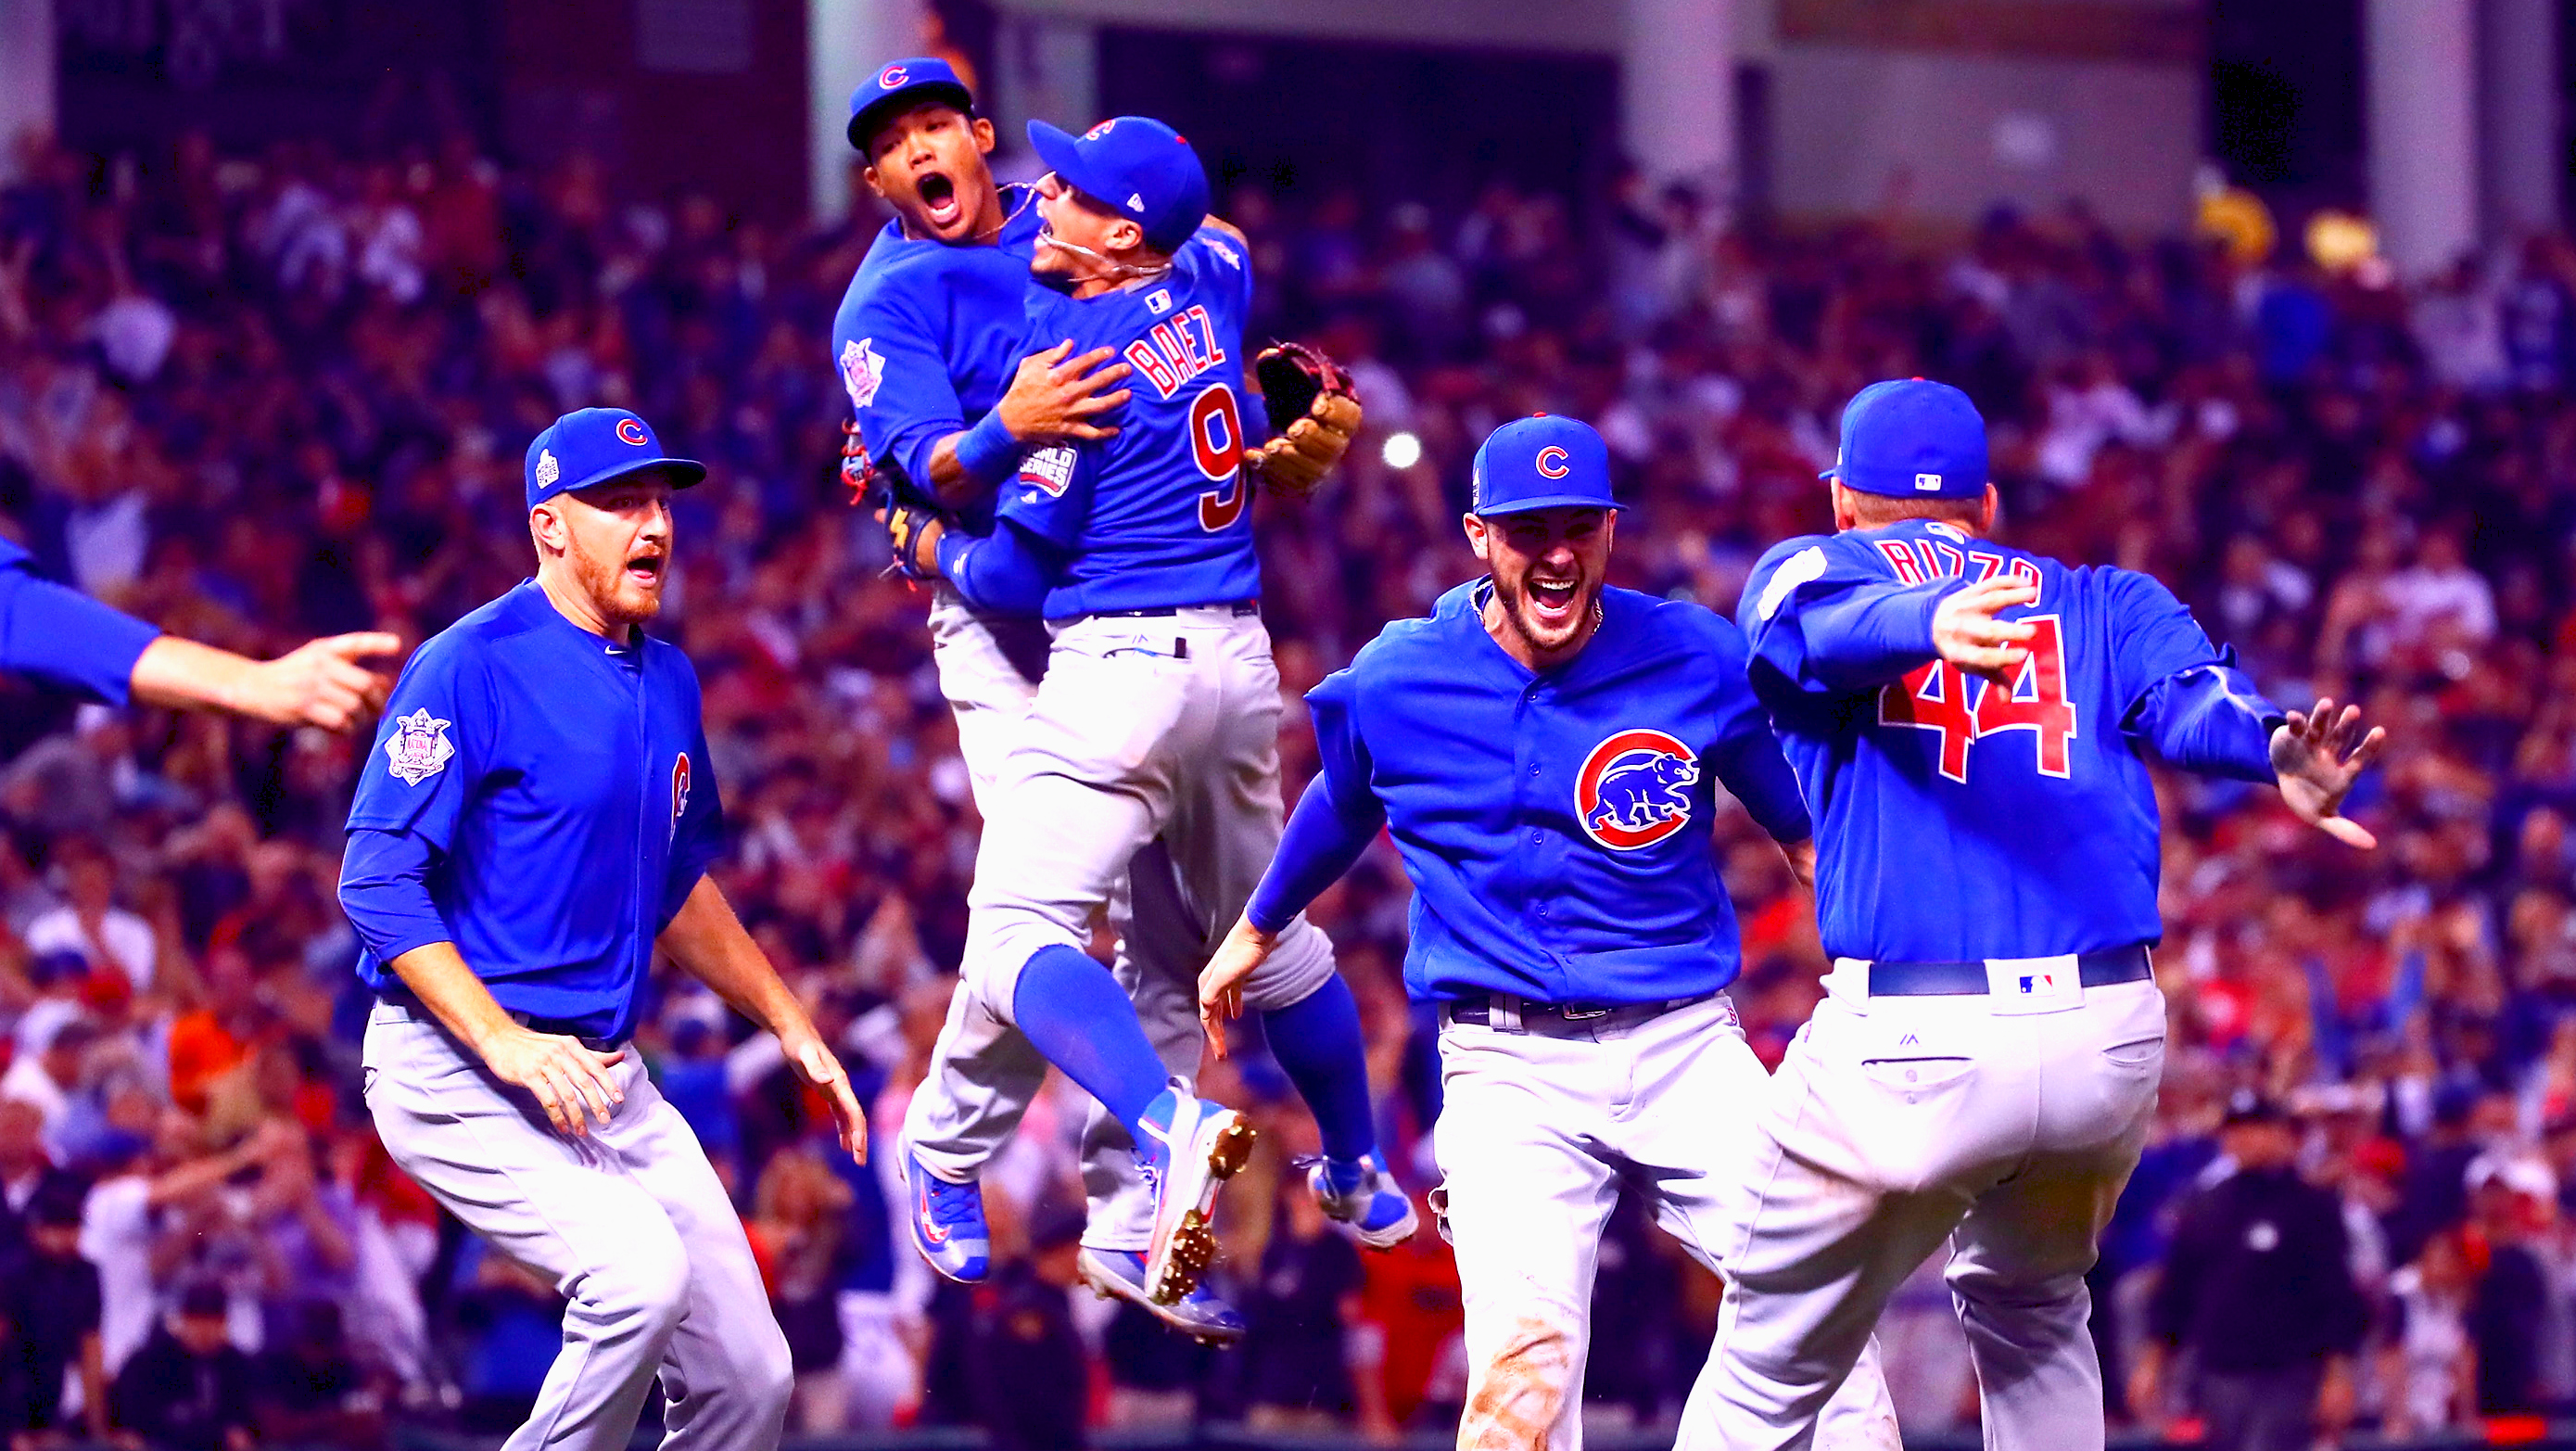 The Chicago Cubs celebrate after defeating the Cleveland Indians 8-7 to win their first World Series in 108 years